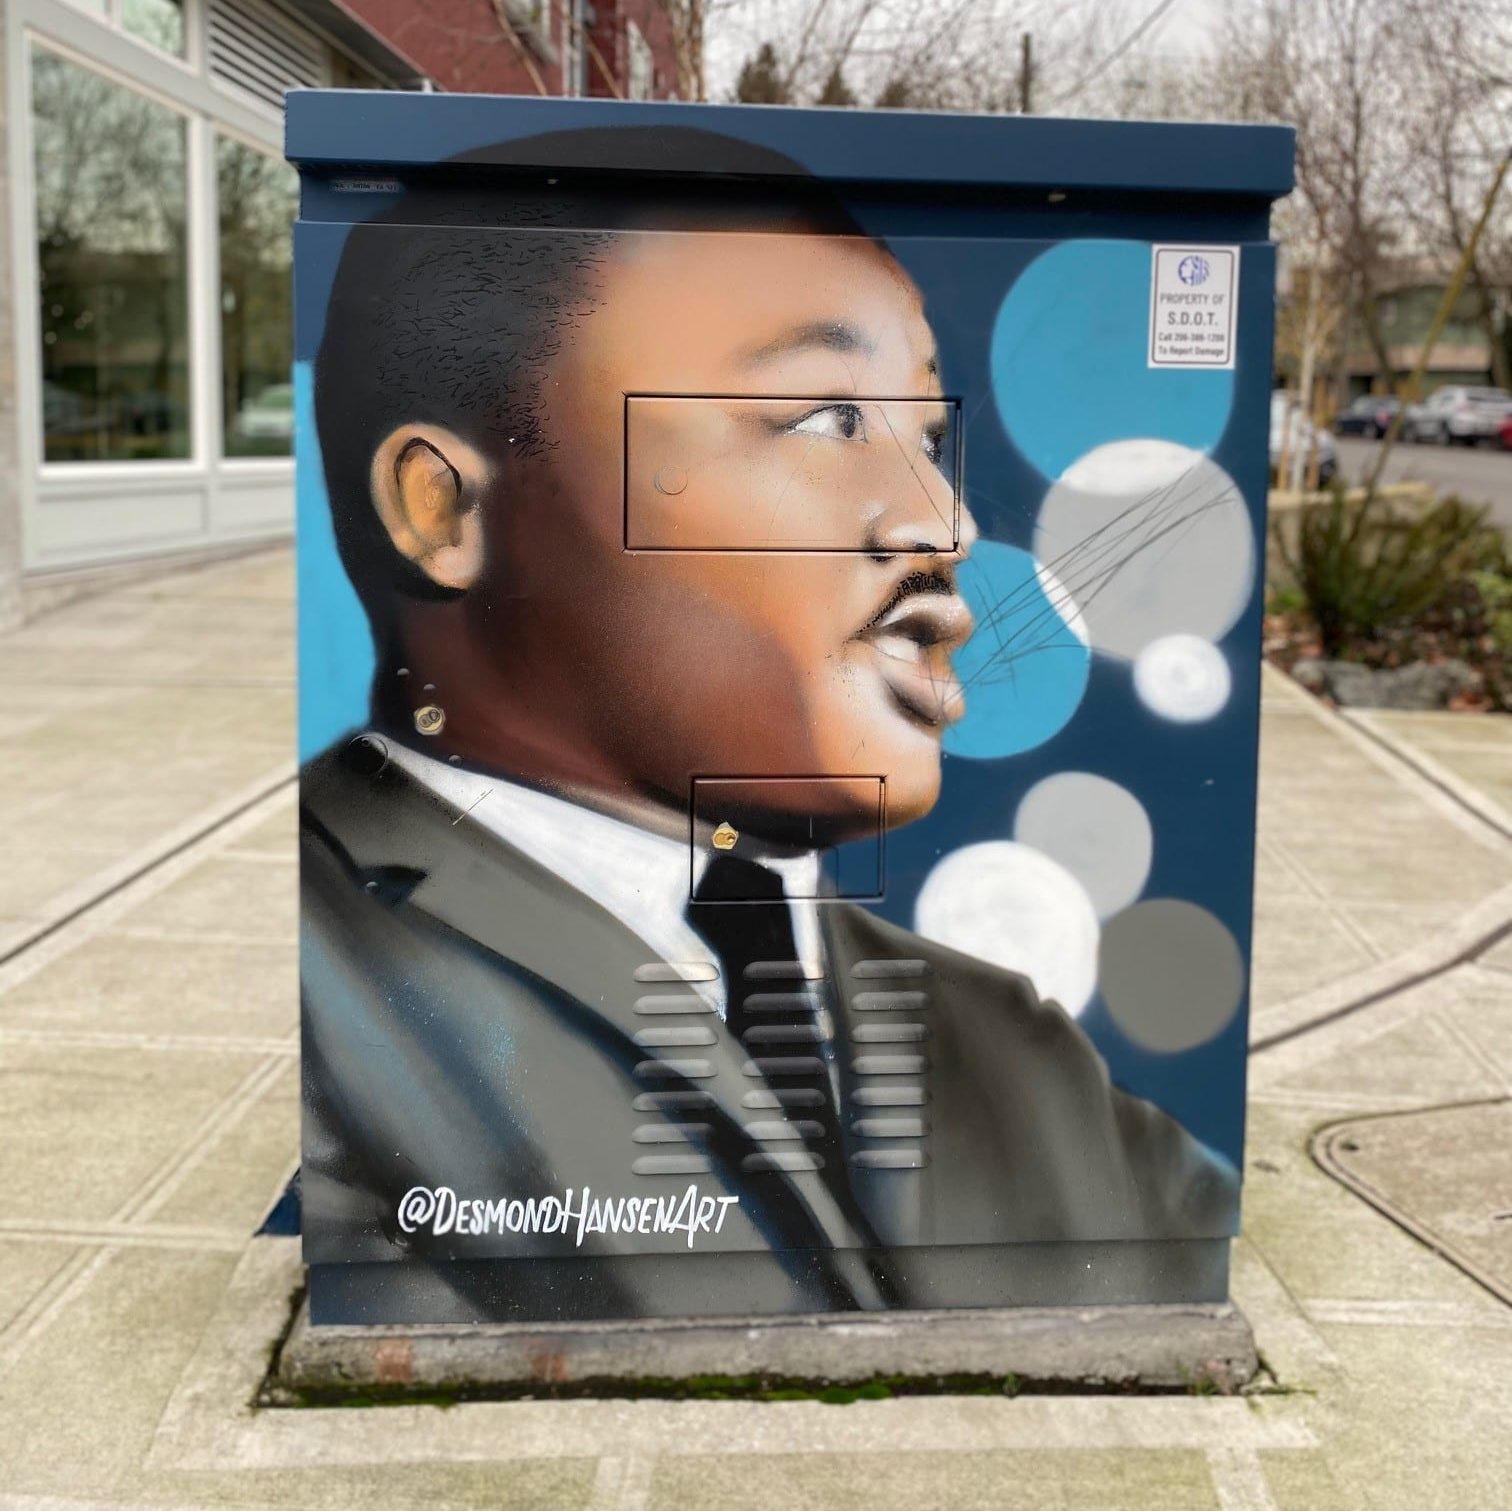 Mural of Martin Luther King Jr by Desmond Hansen on a SDOT traffic signal. Photo by Jeanne Clark on SDOT Flickr